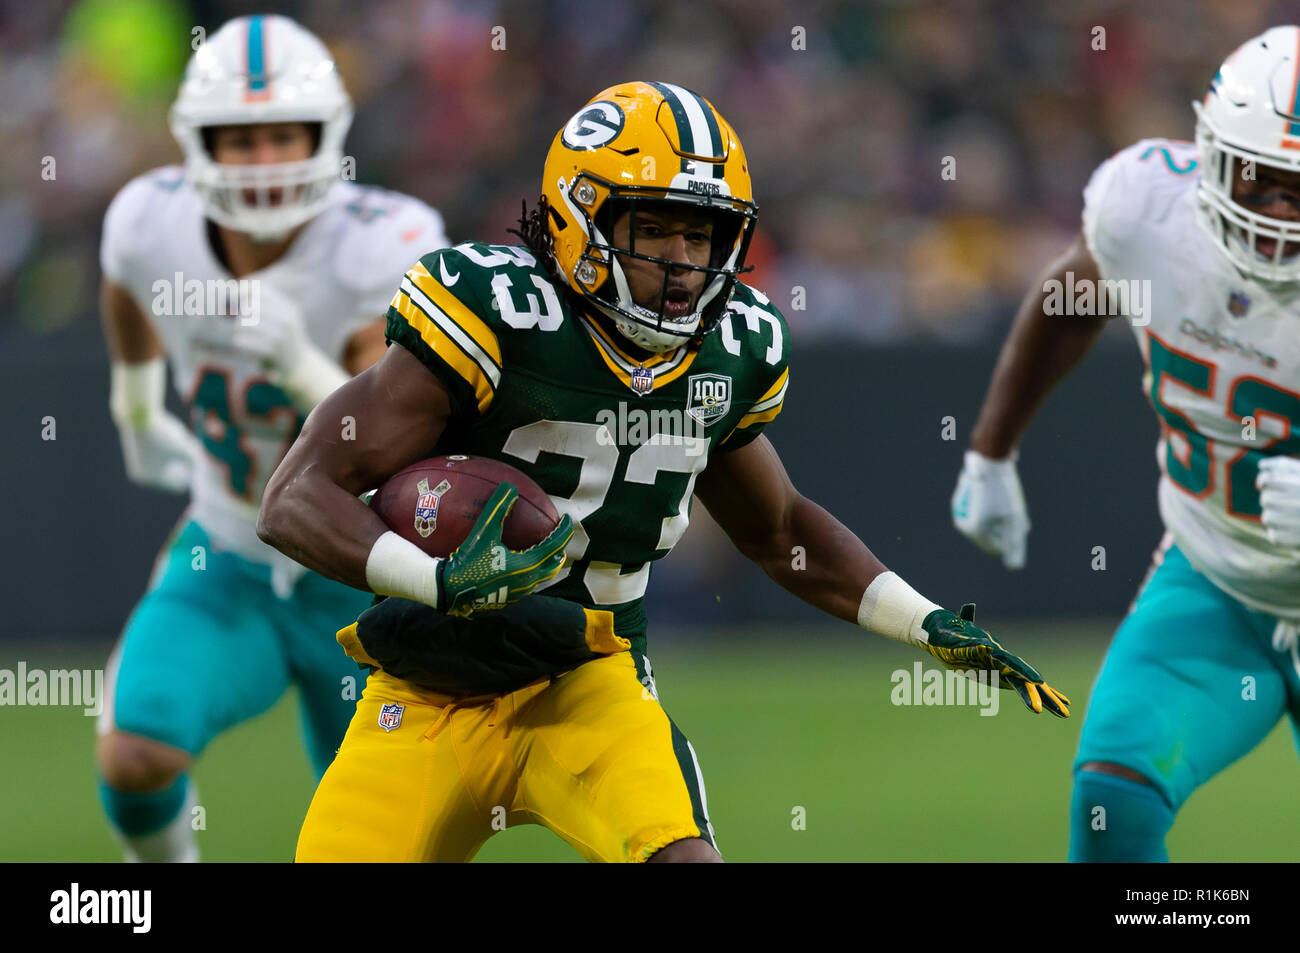 Green Bay, WI, USA. 11th Nov, 2018. Green Bay Packers running back Aaron Jones #33 rushes the ball during the NFL Football game between the Miami Dolphins and the Green Bay Packers at Lambeau Field in Green Bay, WI. Packers defeated the Dolphins 31-12. John Fisher/CSM/Alamy Live News Stock Photo